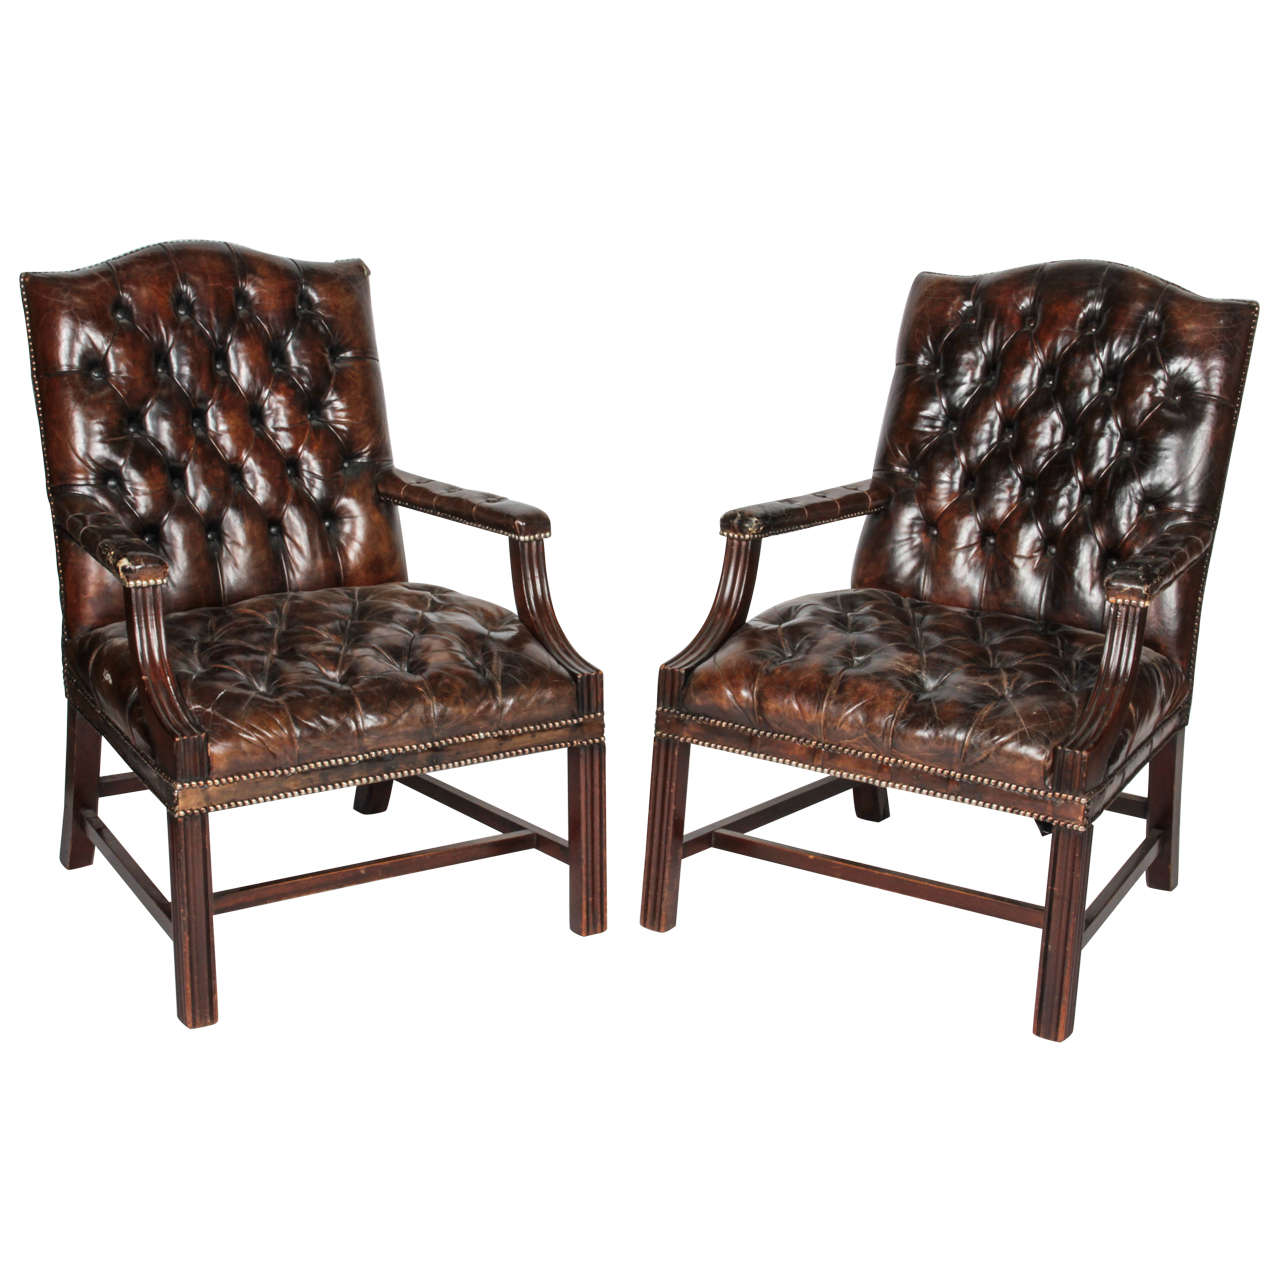 Pair of Brown English Tufted Leather Chesterfield Armchairs For Sale